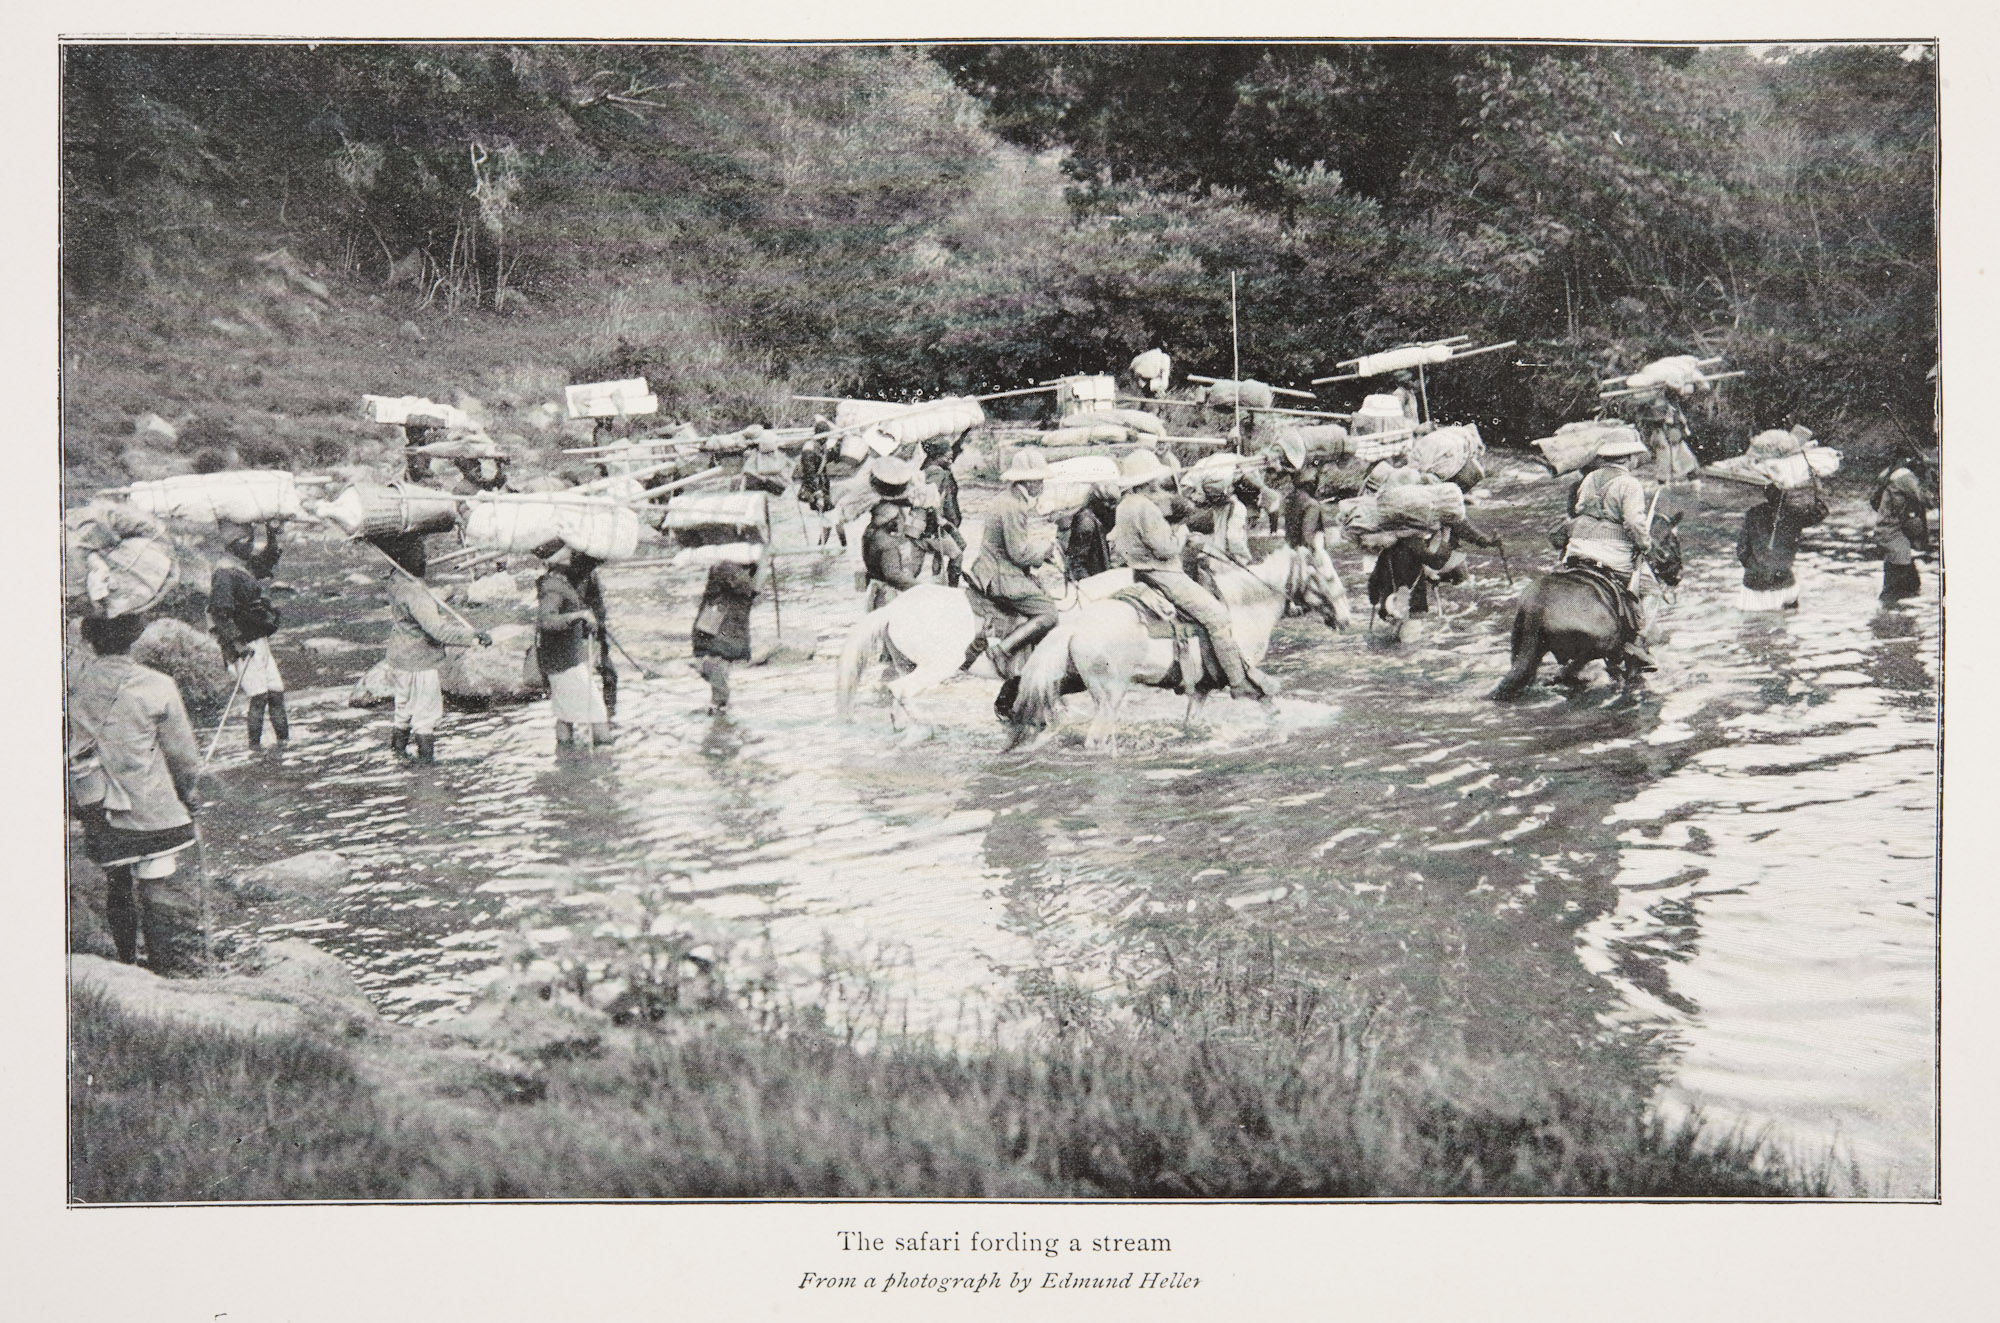 "The safari fording a stream," by Edmund Heller, page 160 from Theodore Roosevelt's African game trails (1910). St Andrews copy at Photo SK252.R7A4  